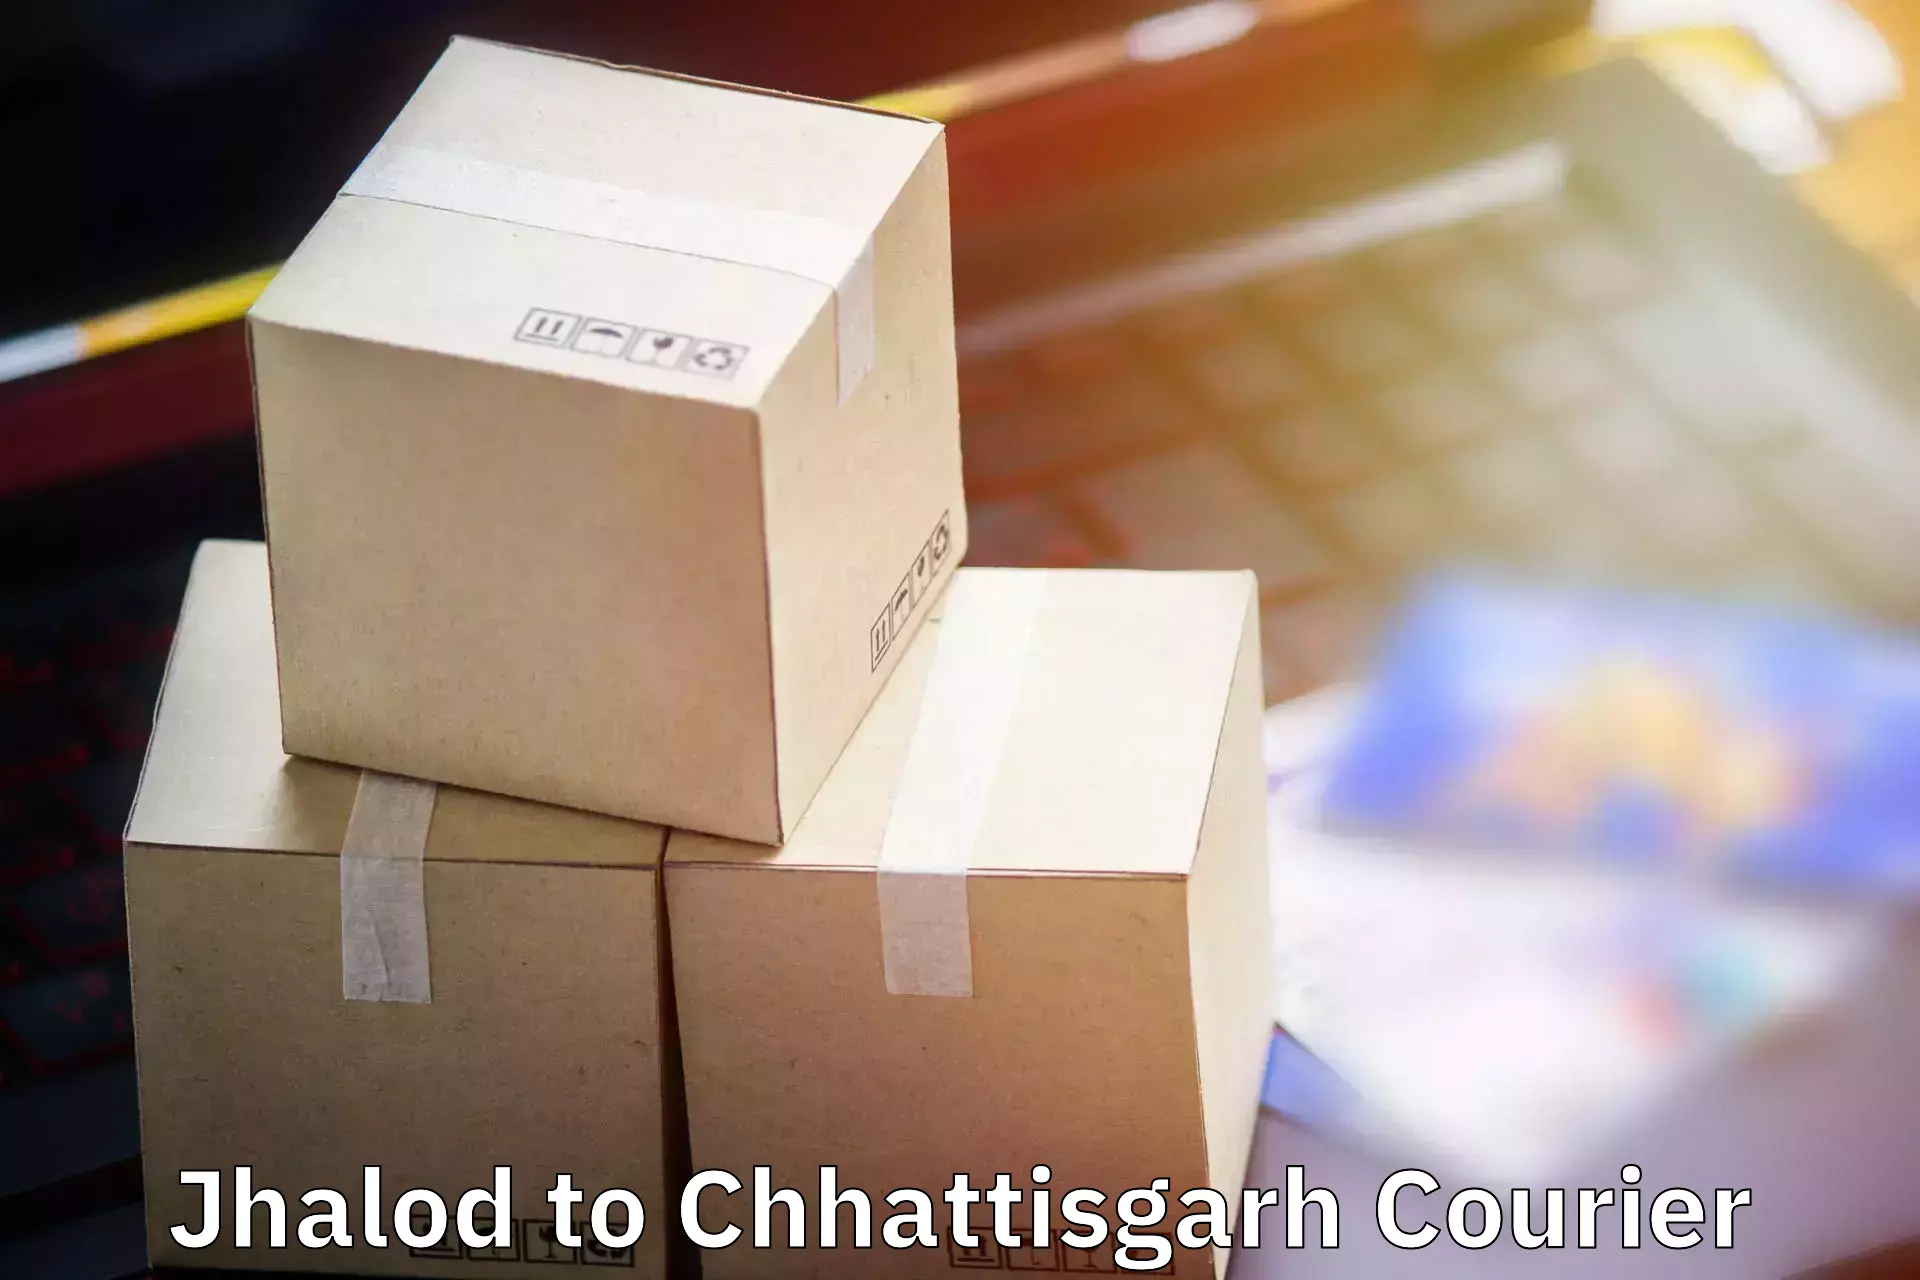 Luggage delivery system Jhalod to Chhattisgarh